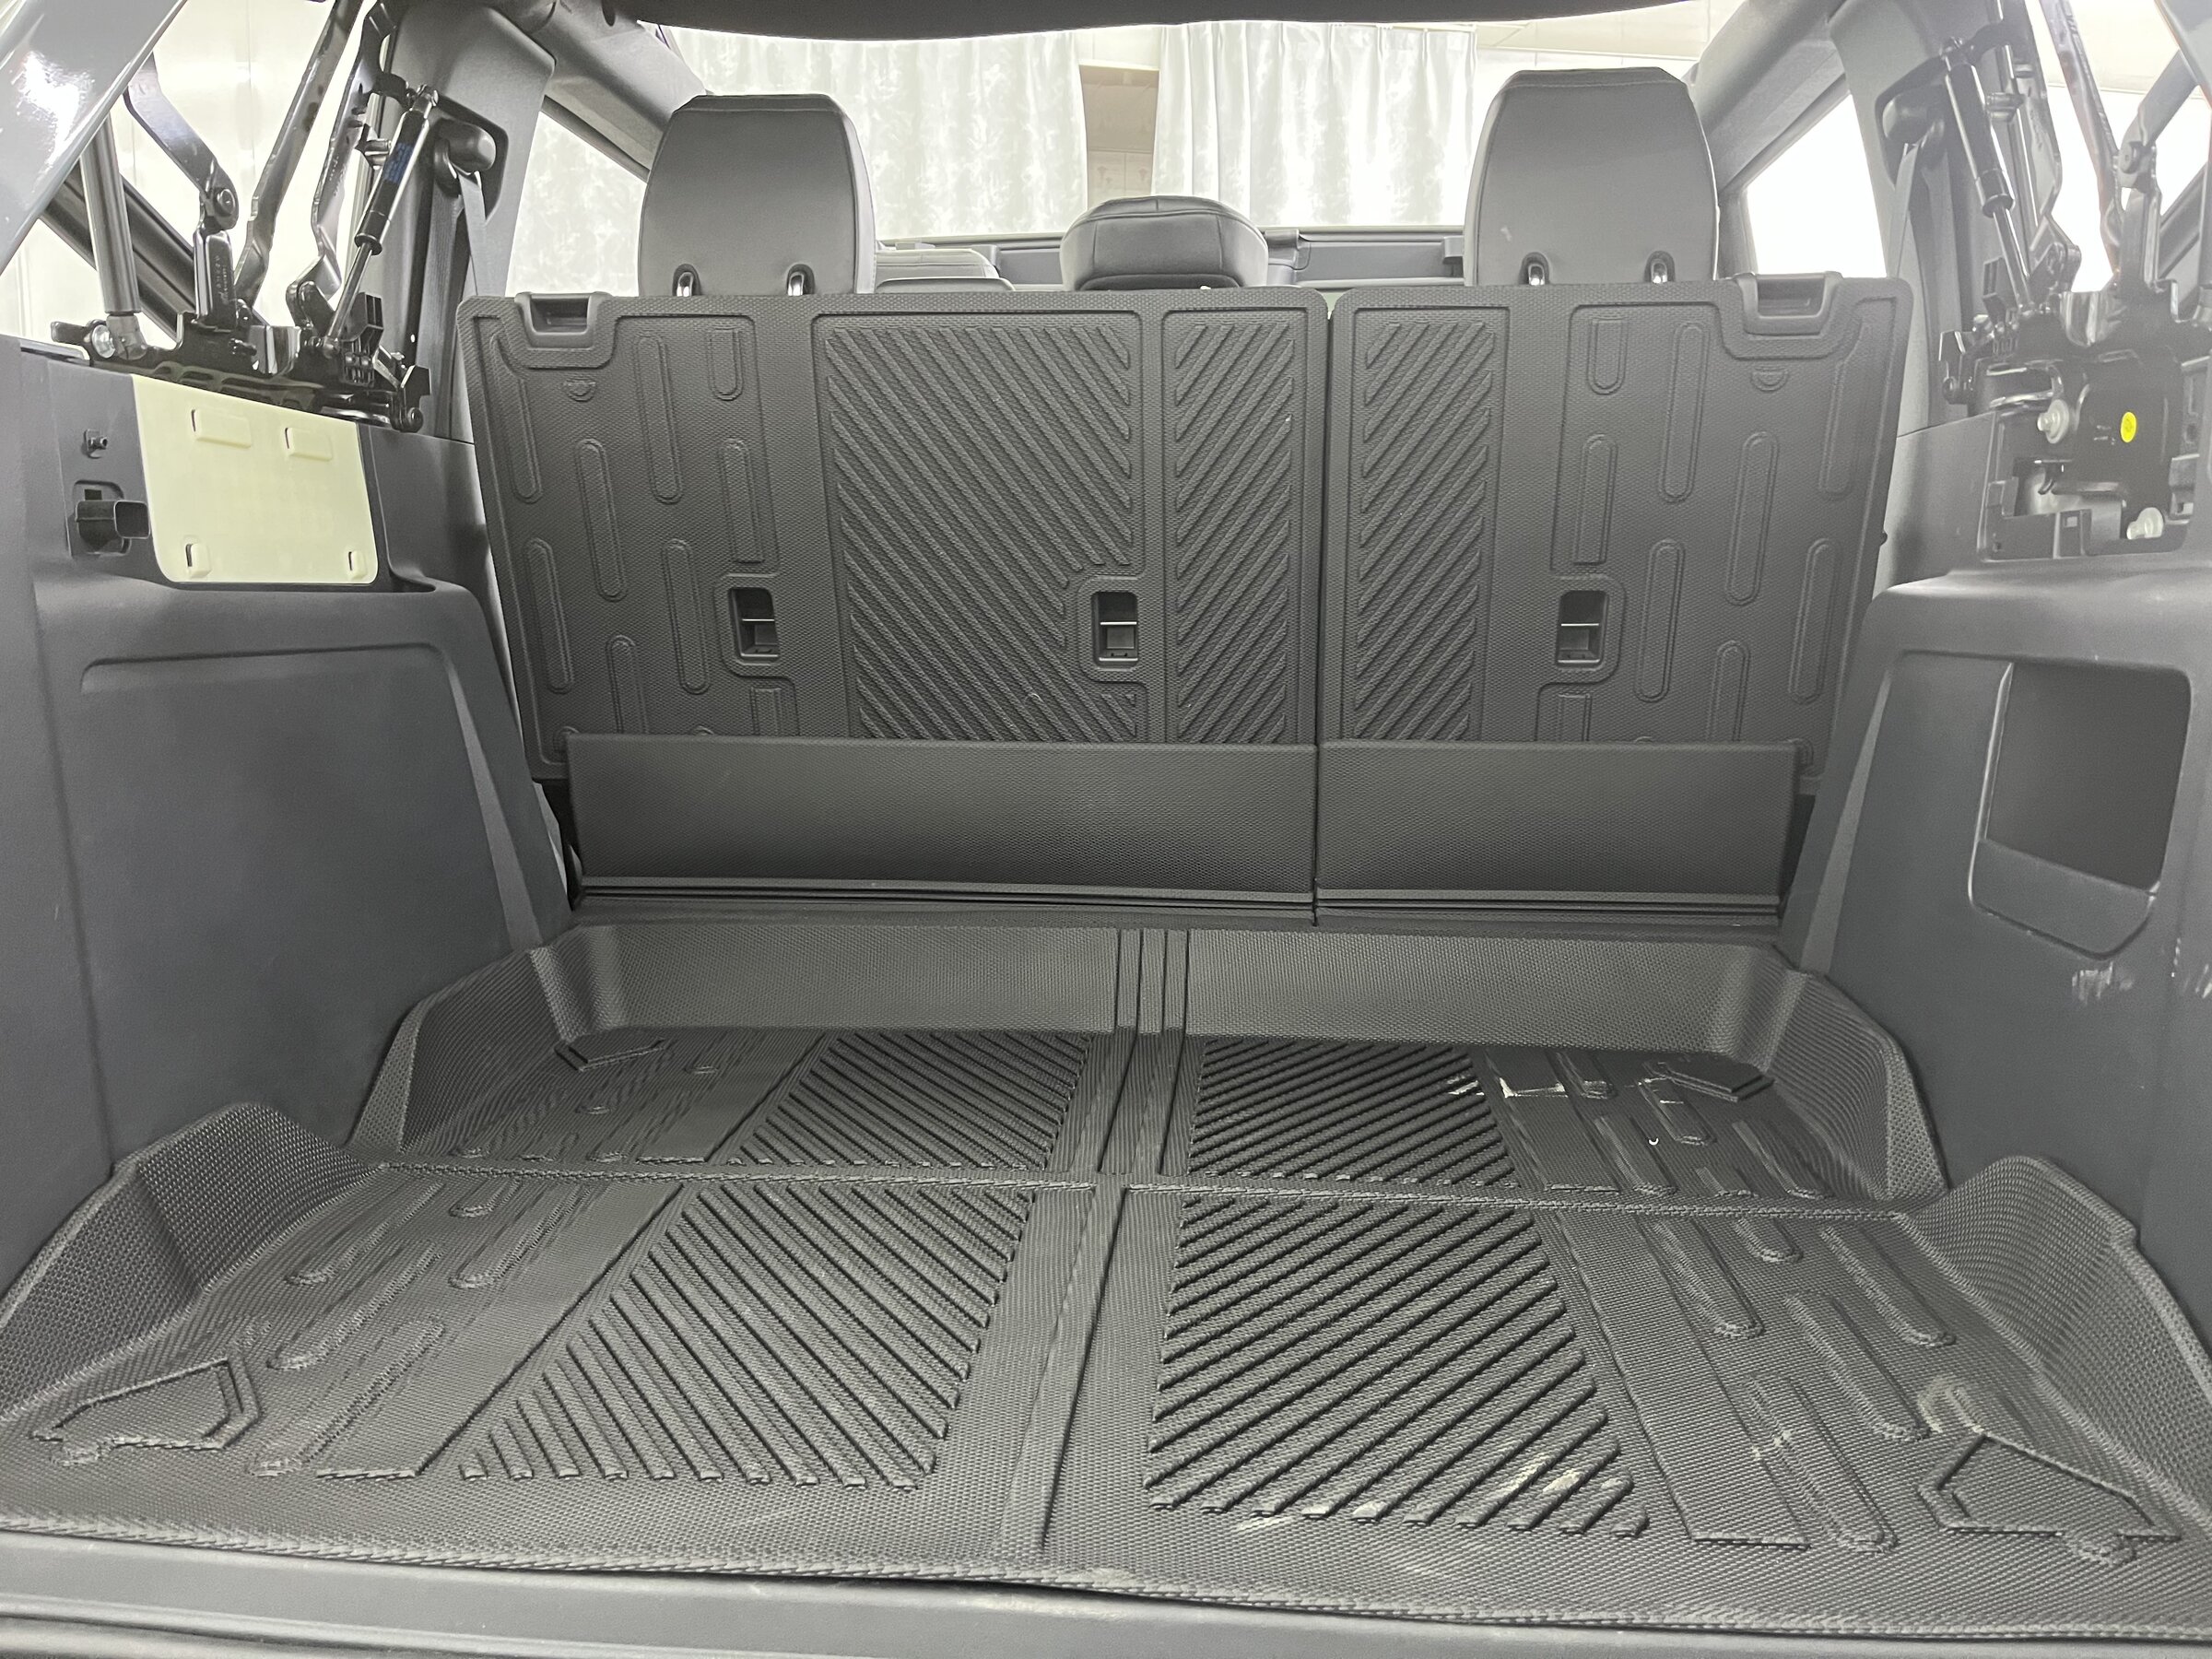 Ford Bronco 【Mabett】The back for the rear seats for Bronco 4 door has been designed, Coming soon! lQDPDhsr_6P7eSTNC9DND8Cwsyea8LewcBcCGMKv74CrAA_4032_3024